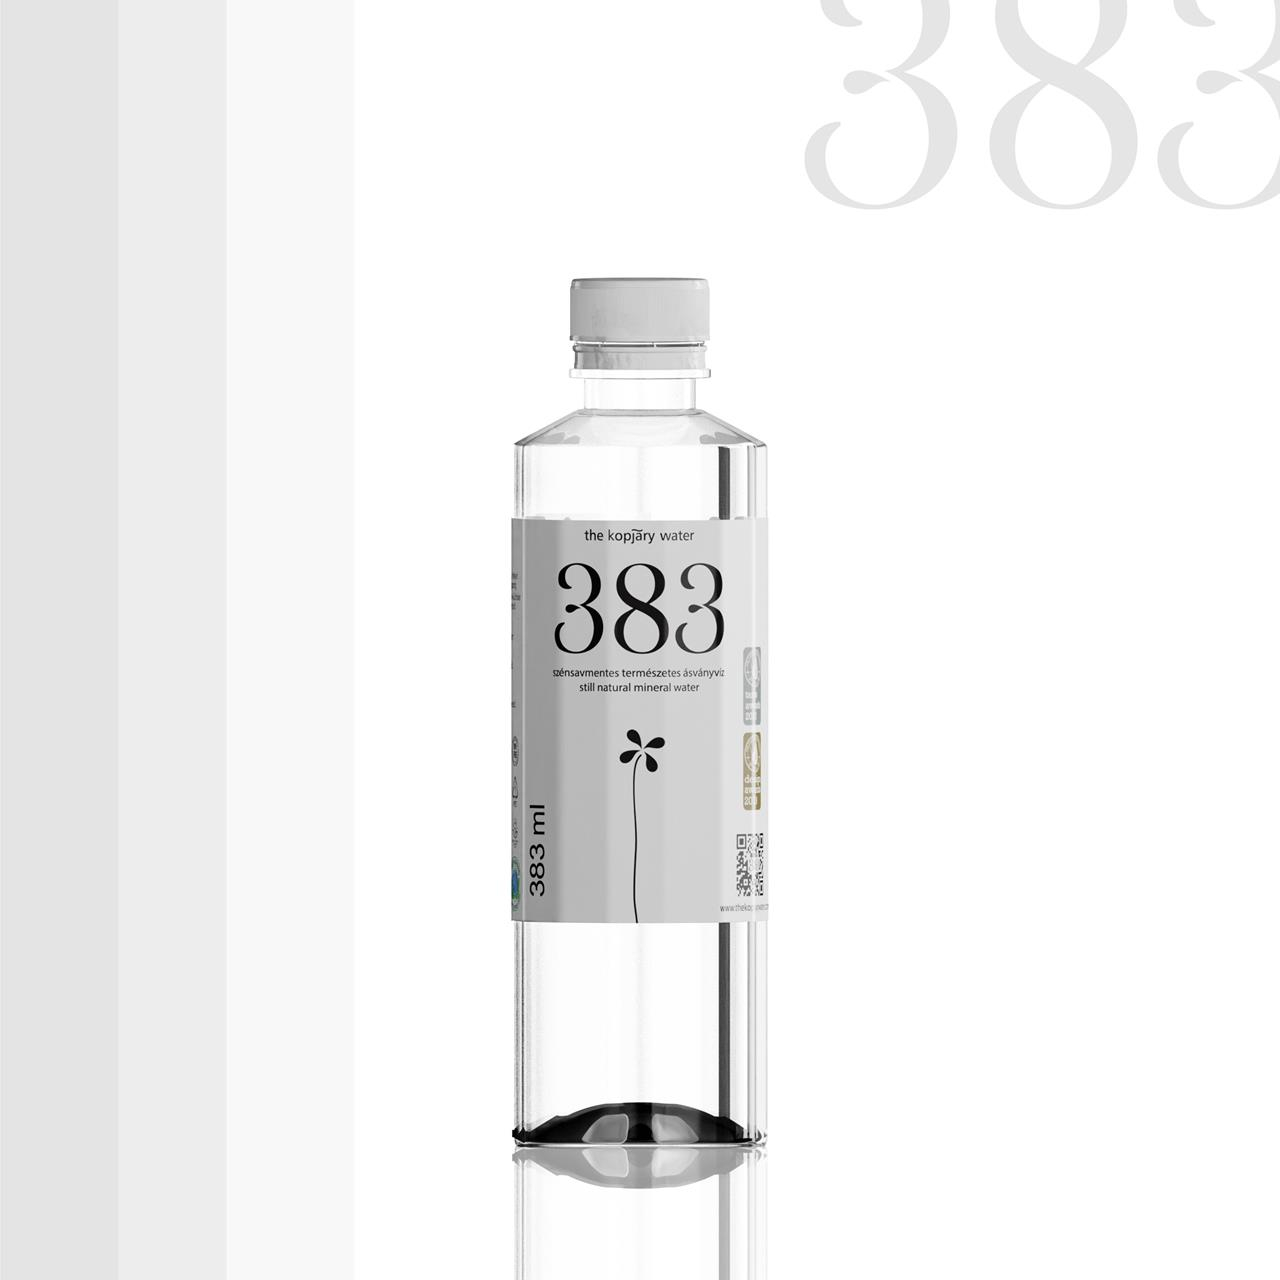 383 THE KOPJARY WATER, 383 ml